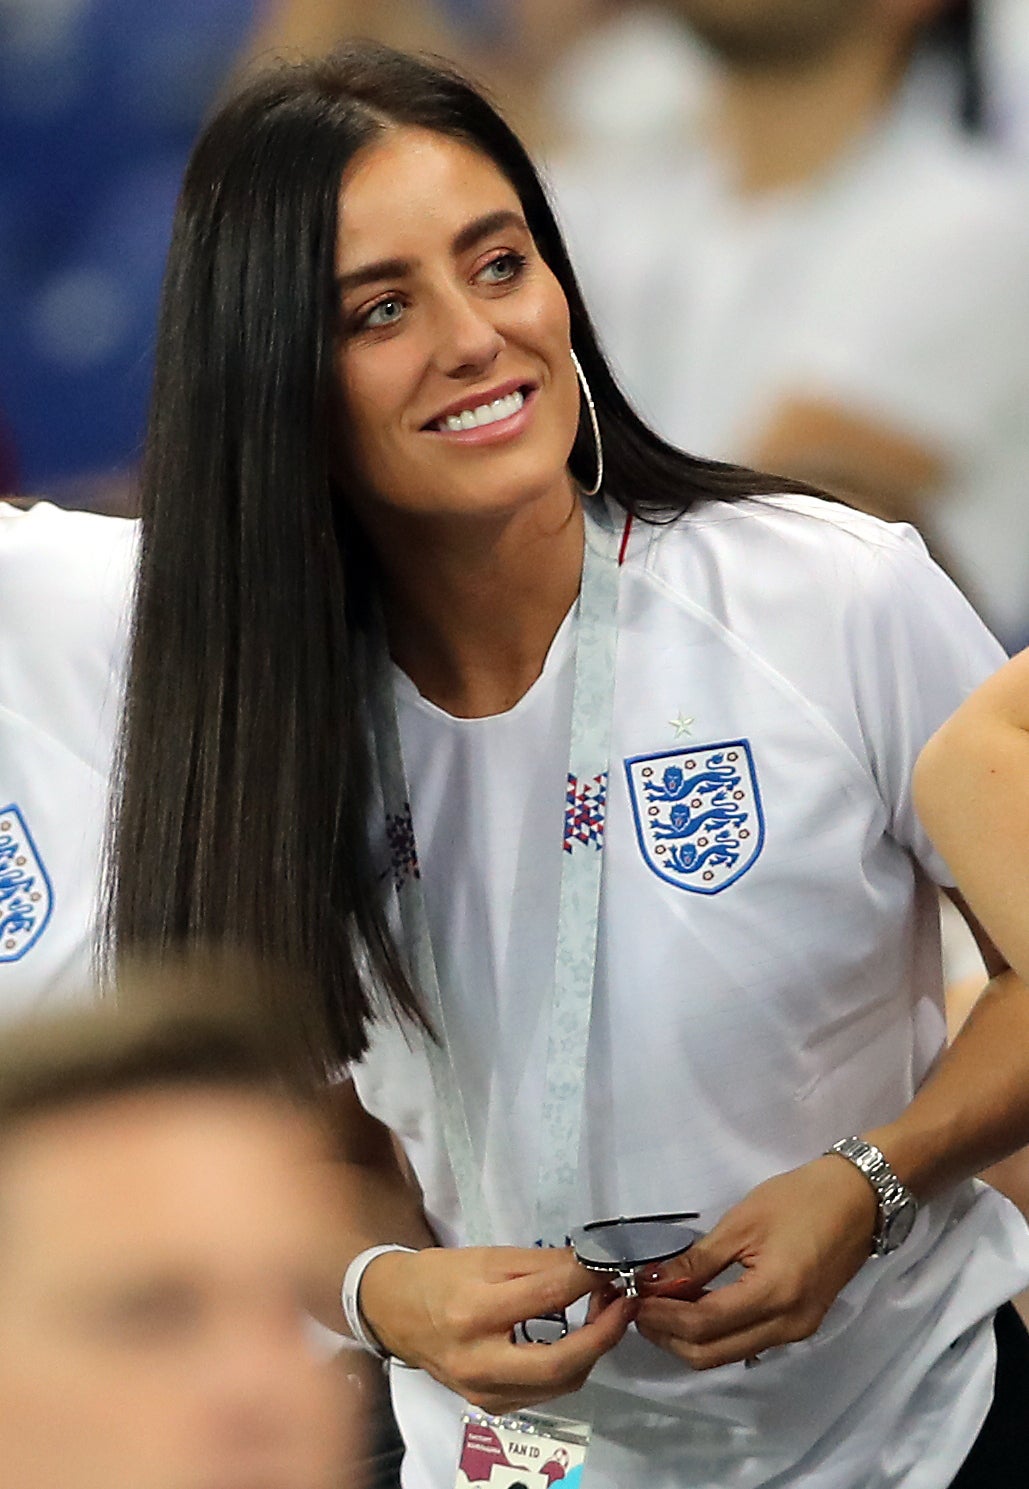 Frn Hawkins told the court about her time with the England players’ wives and girlfriends at the Russia World Cup